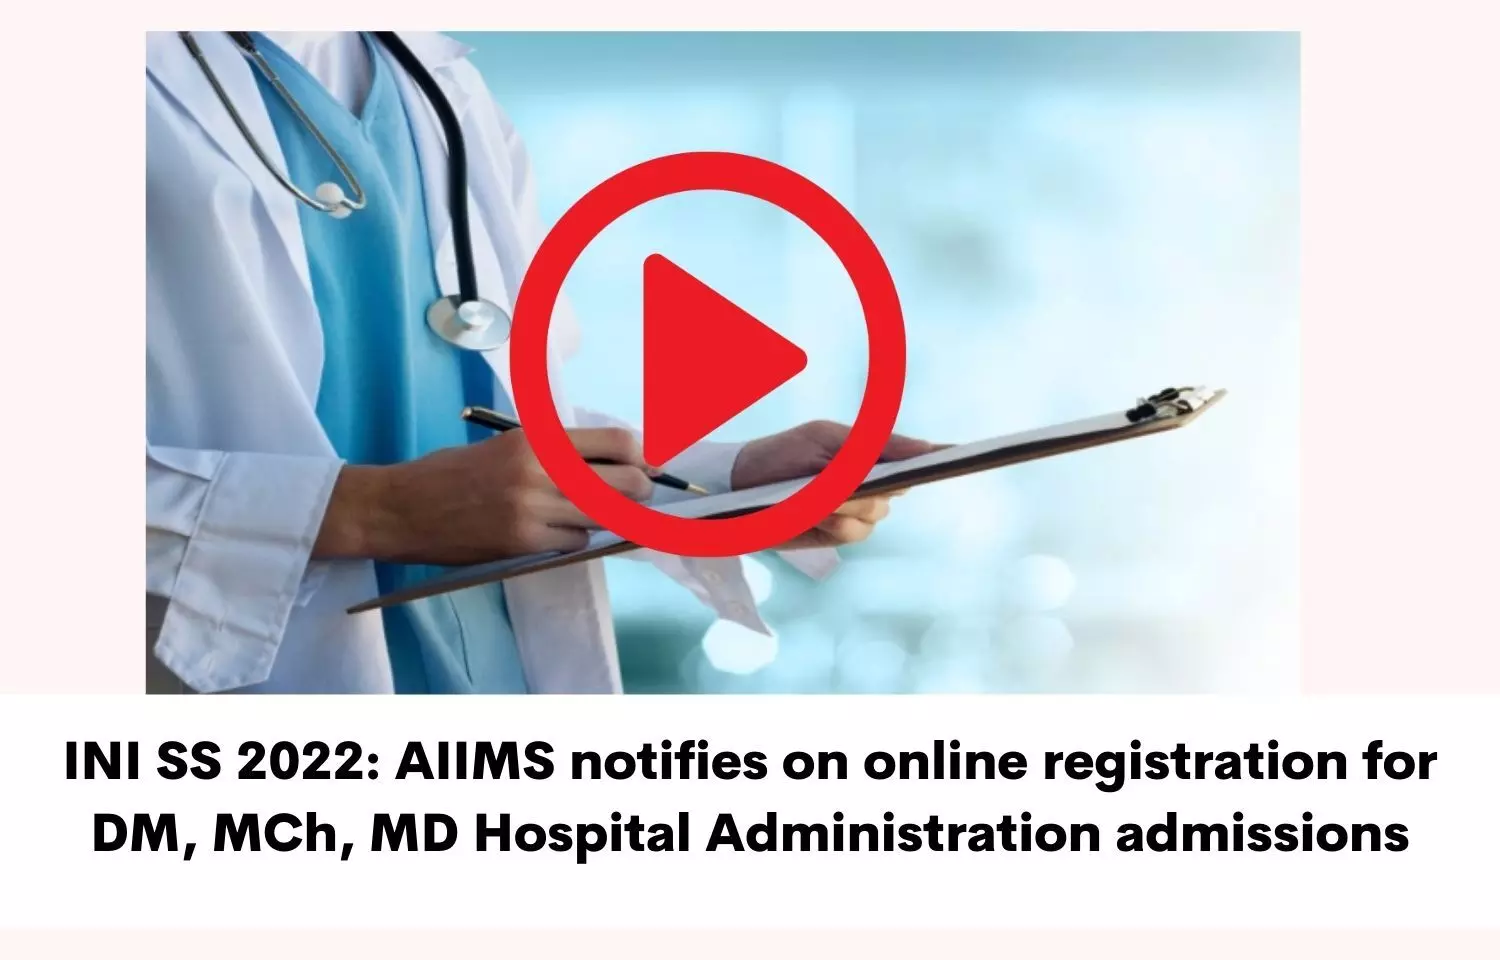 INI SS 2022: AIIMS notifies on online registration for DM, MCh, MD Hospital Administration admissions